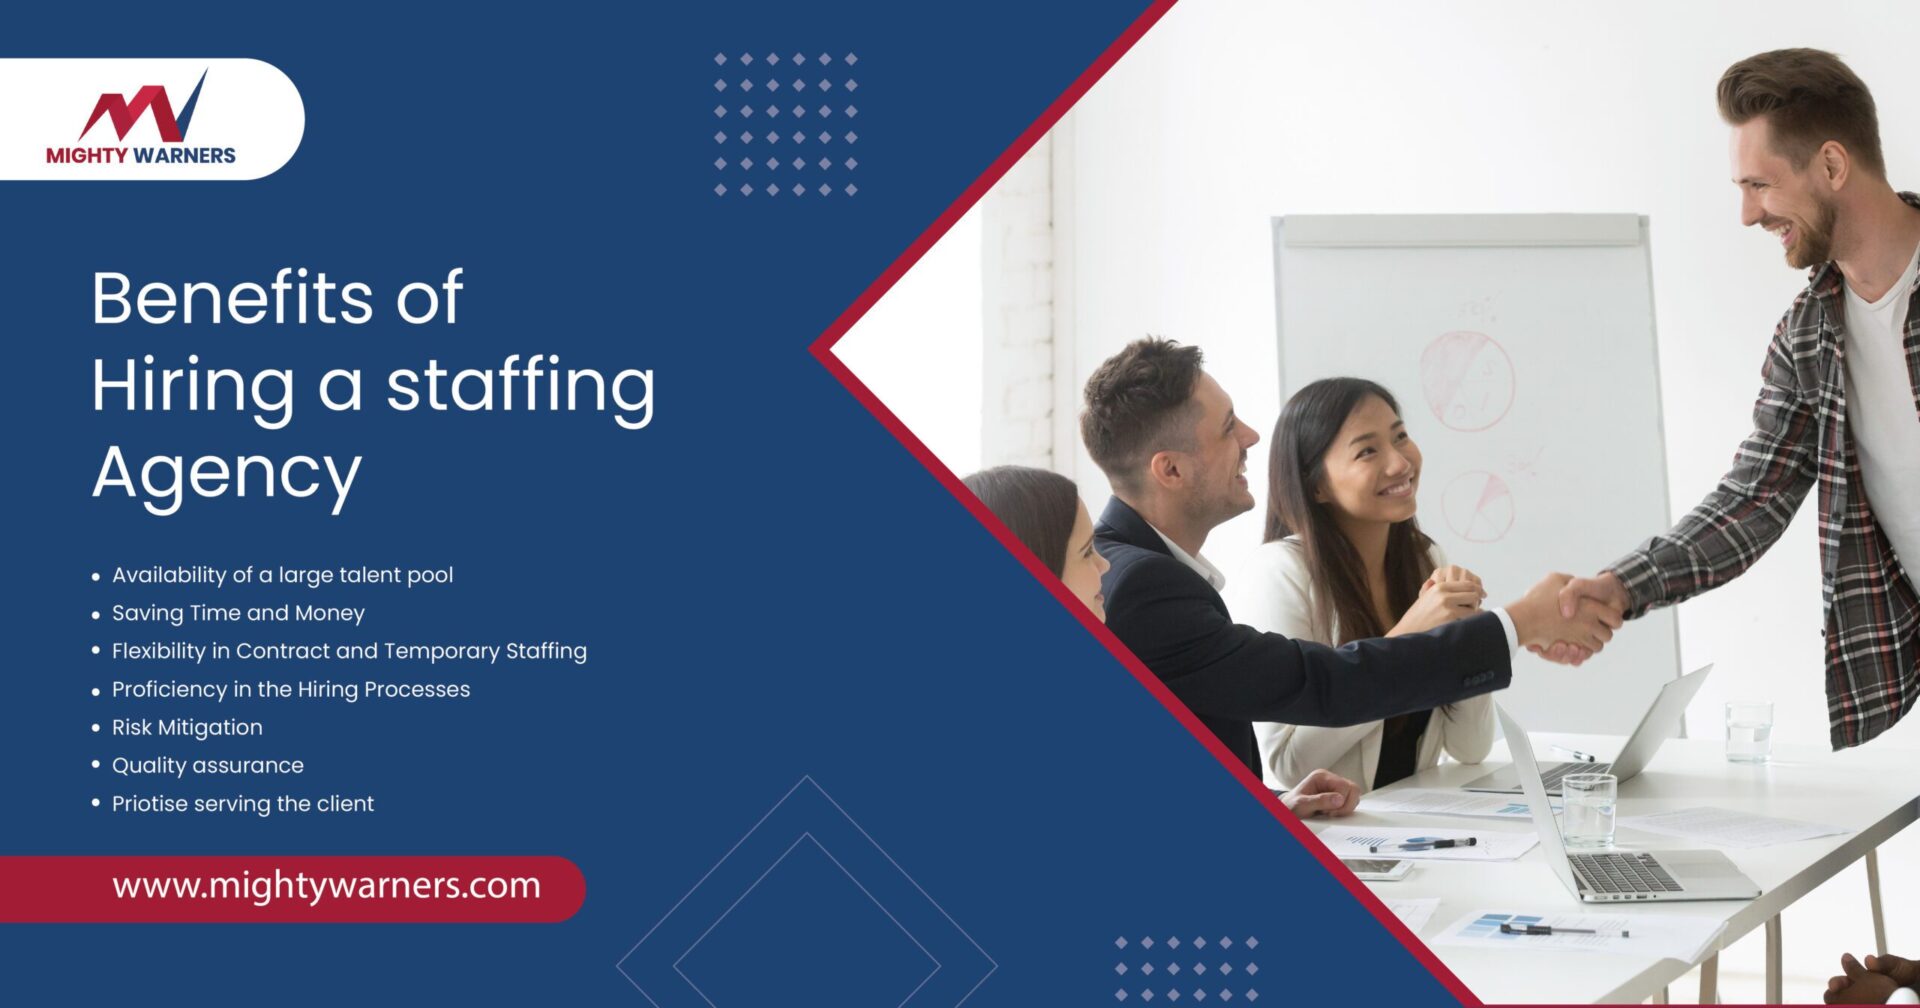 Benefits of hiring a staffing agency